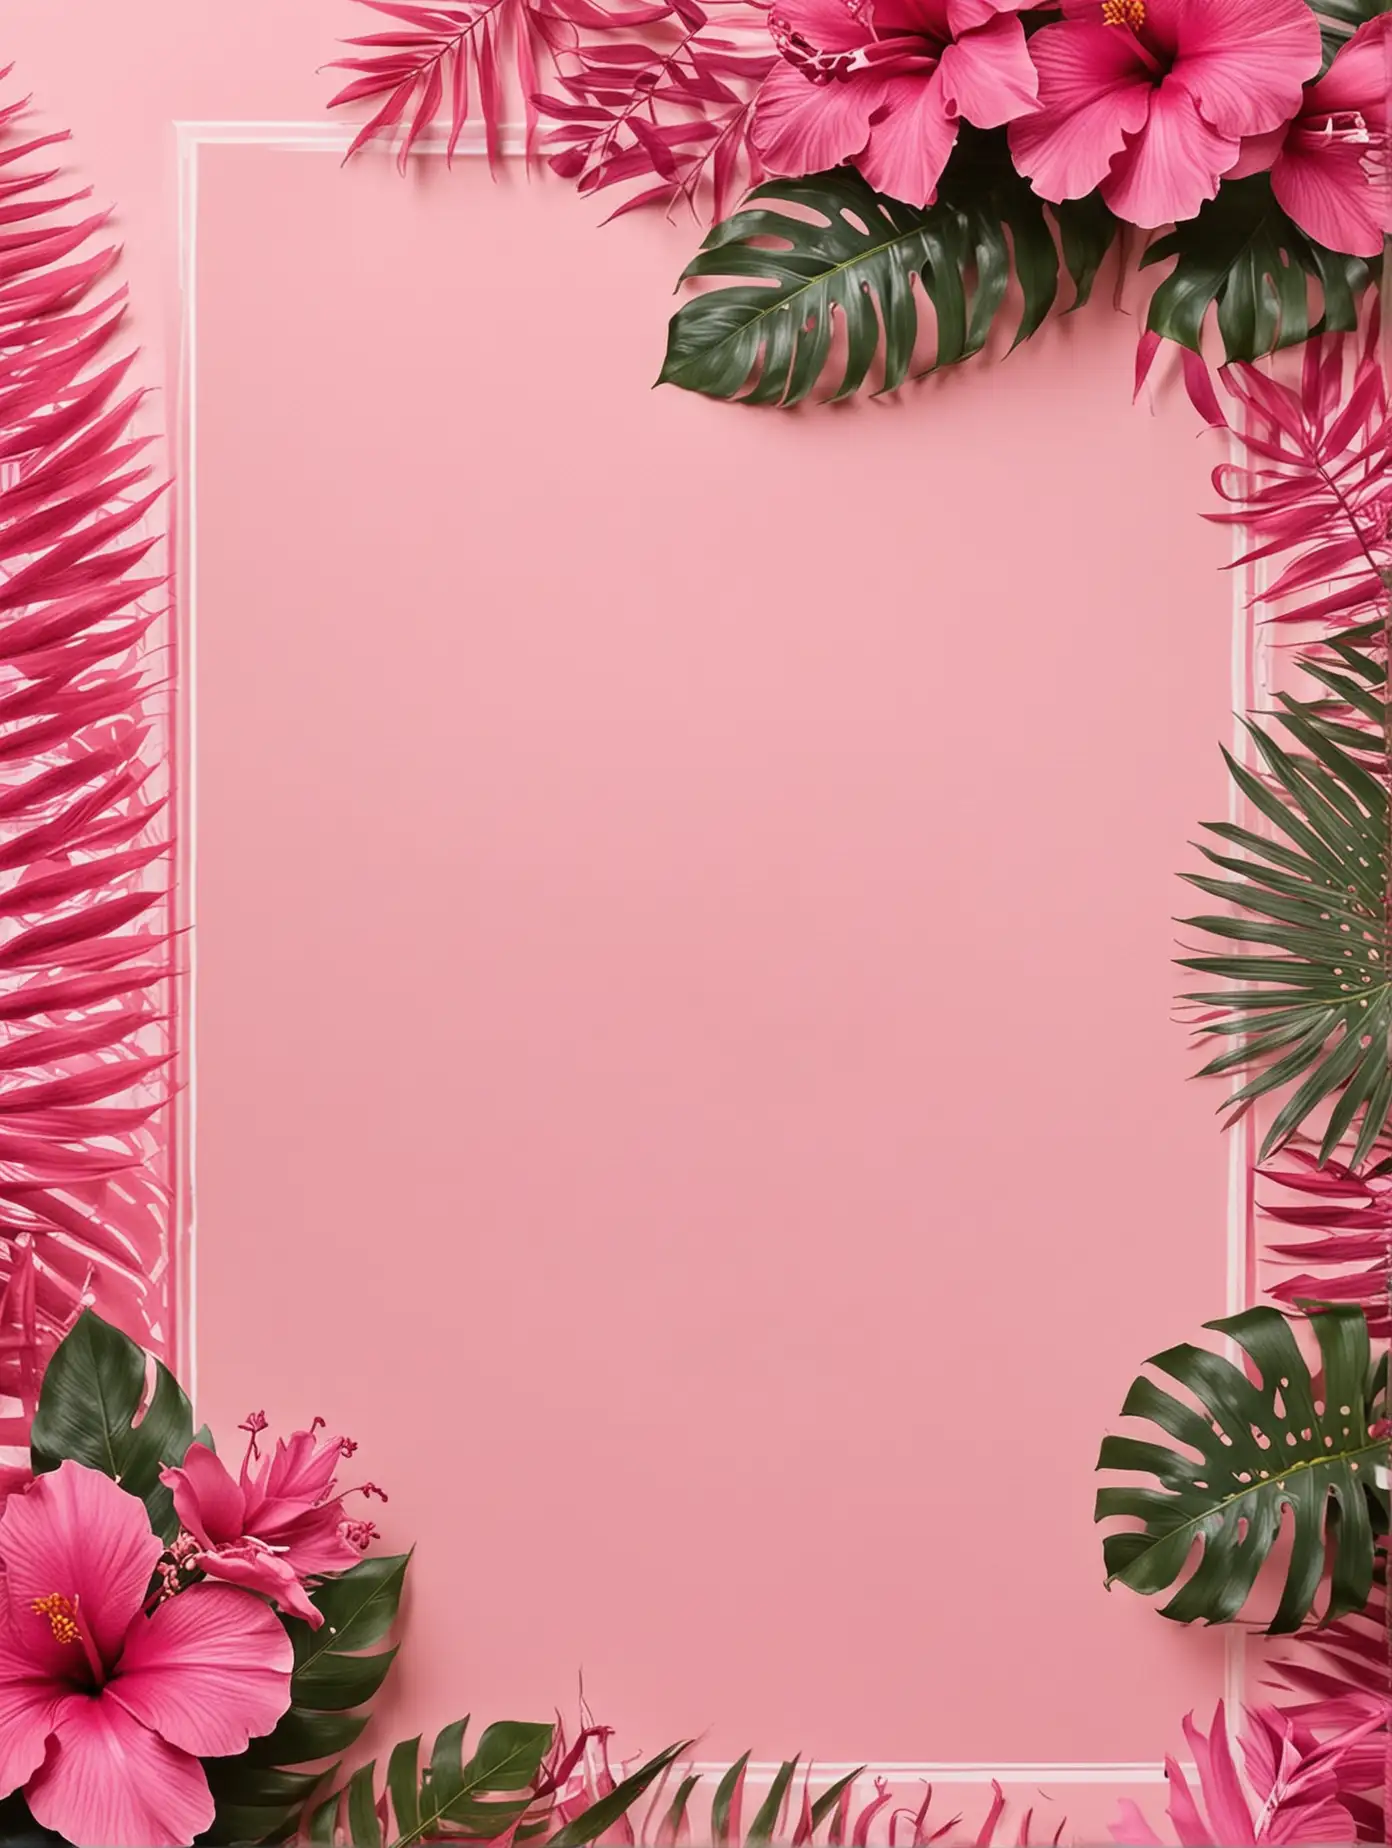 Tropical Paradise with Vibrant Pink Shades